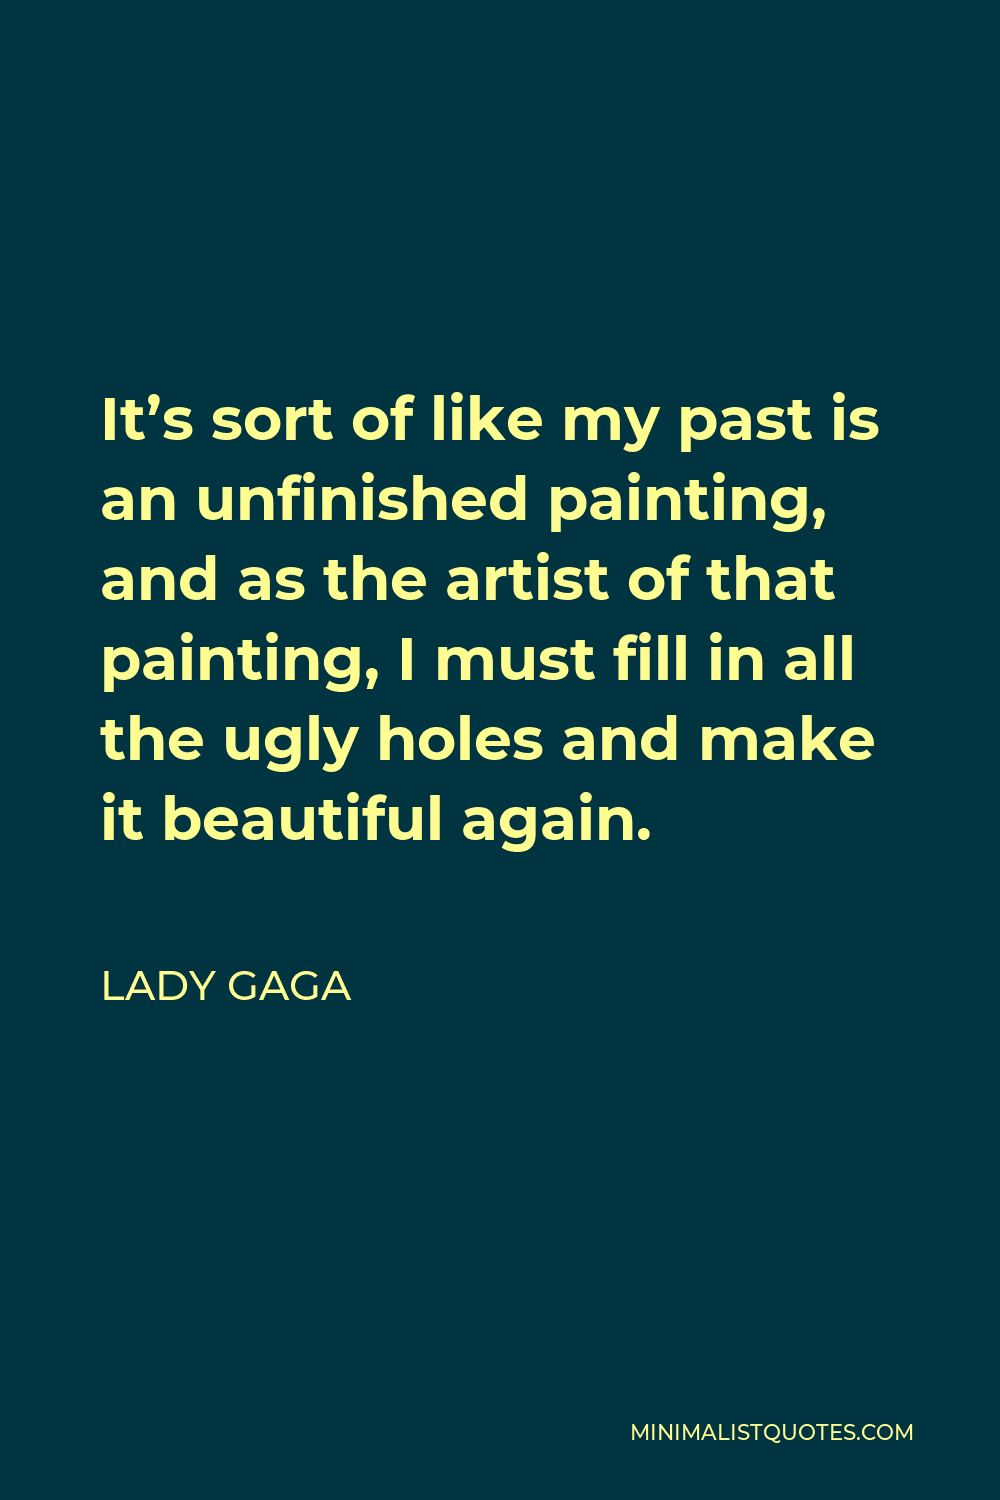 Lady Gaga Quote - It’s sort of like my past is an unfinished painting, and as the artist of that painting, I must fill in all the ugly holes and make it beautiful again.